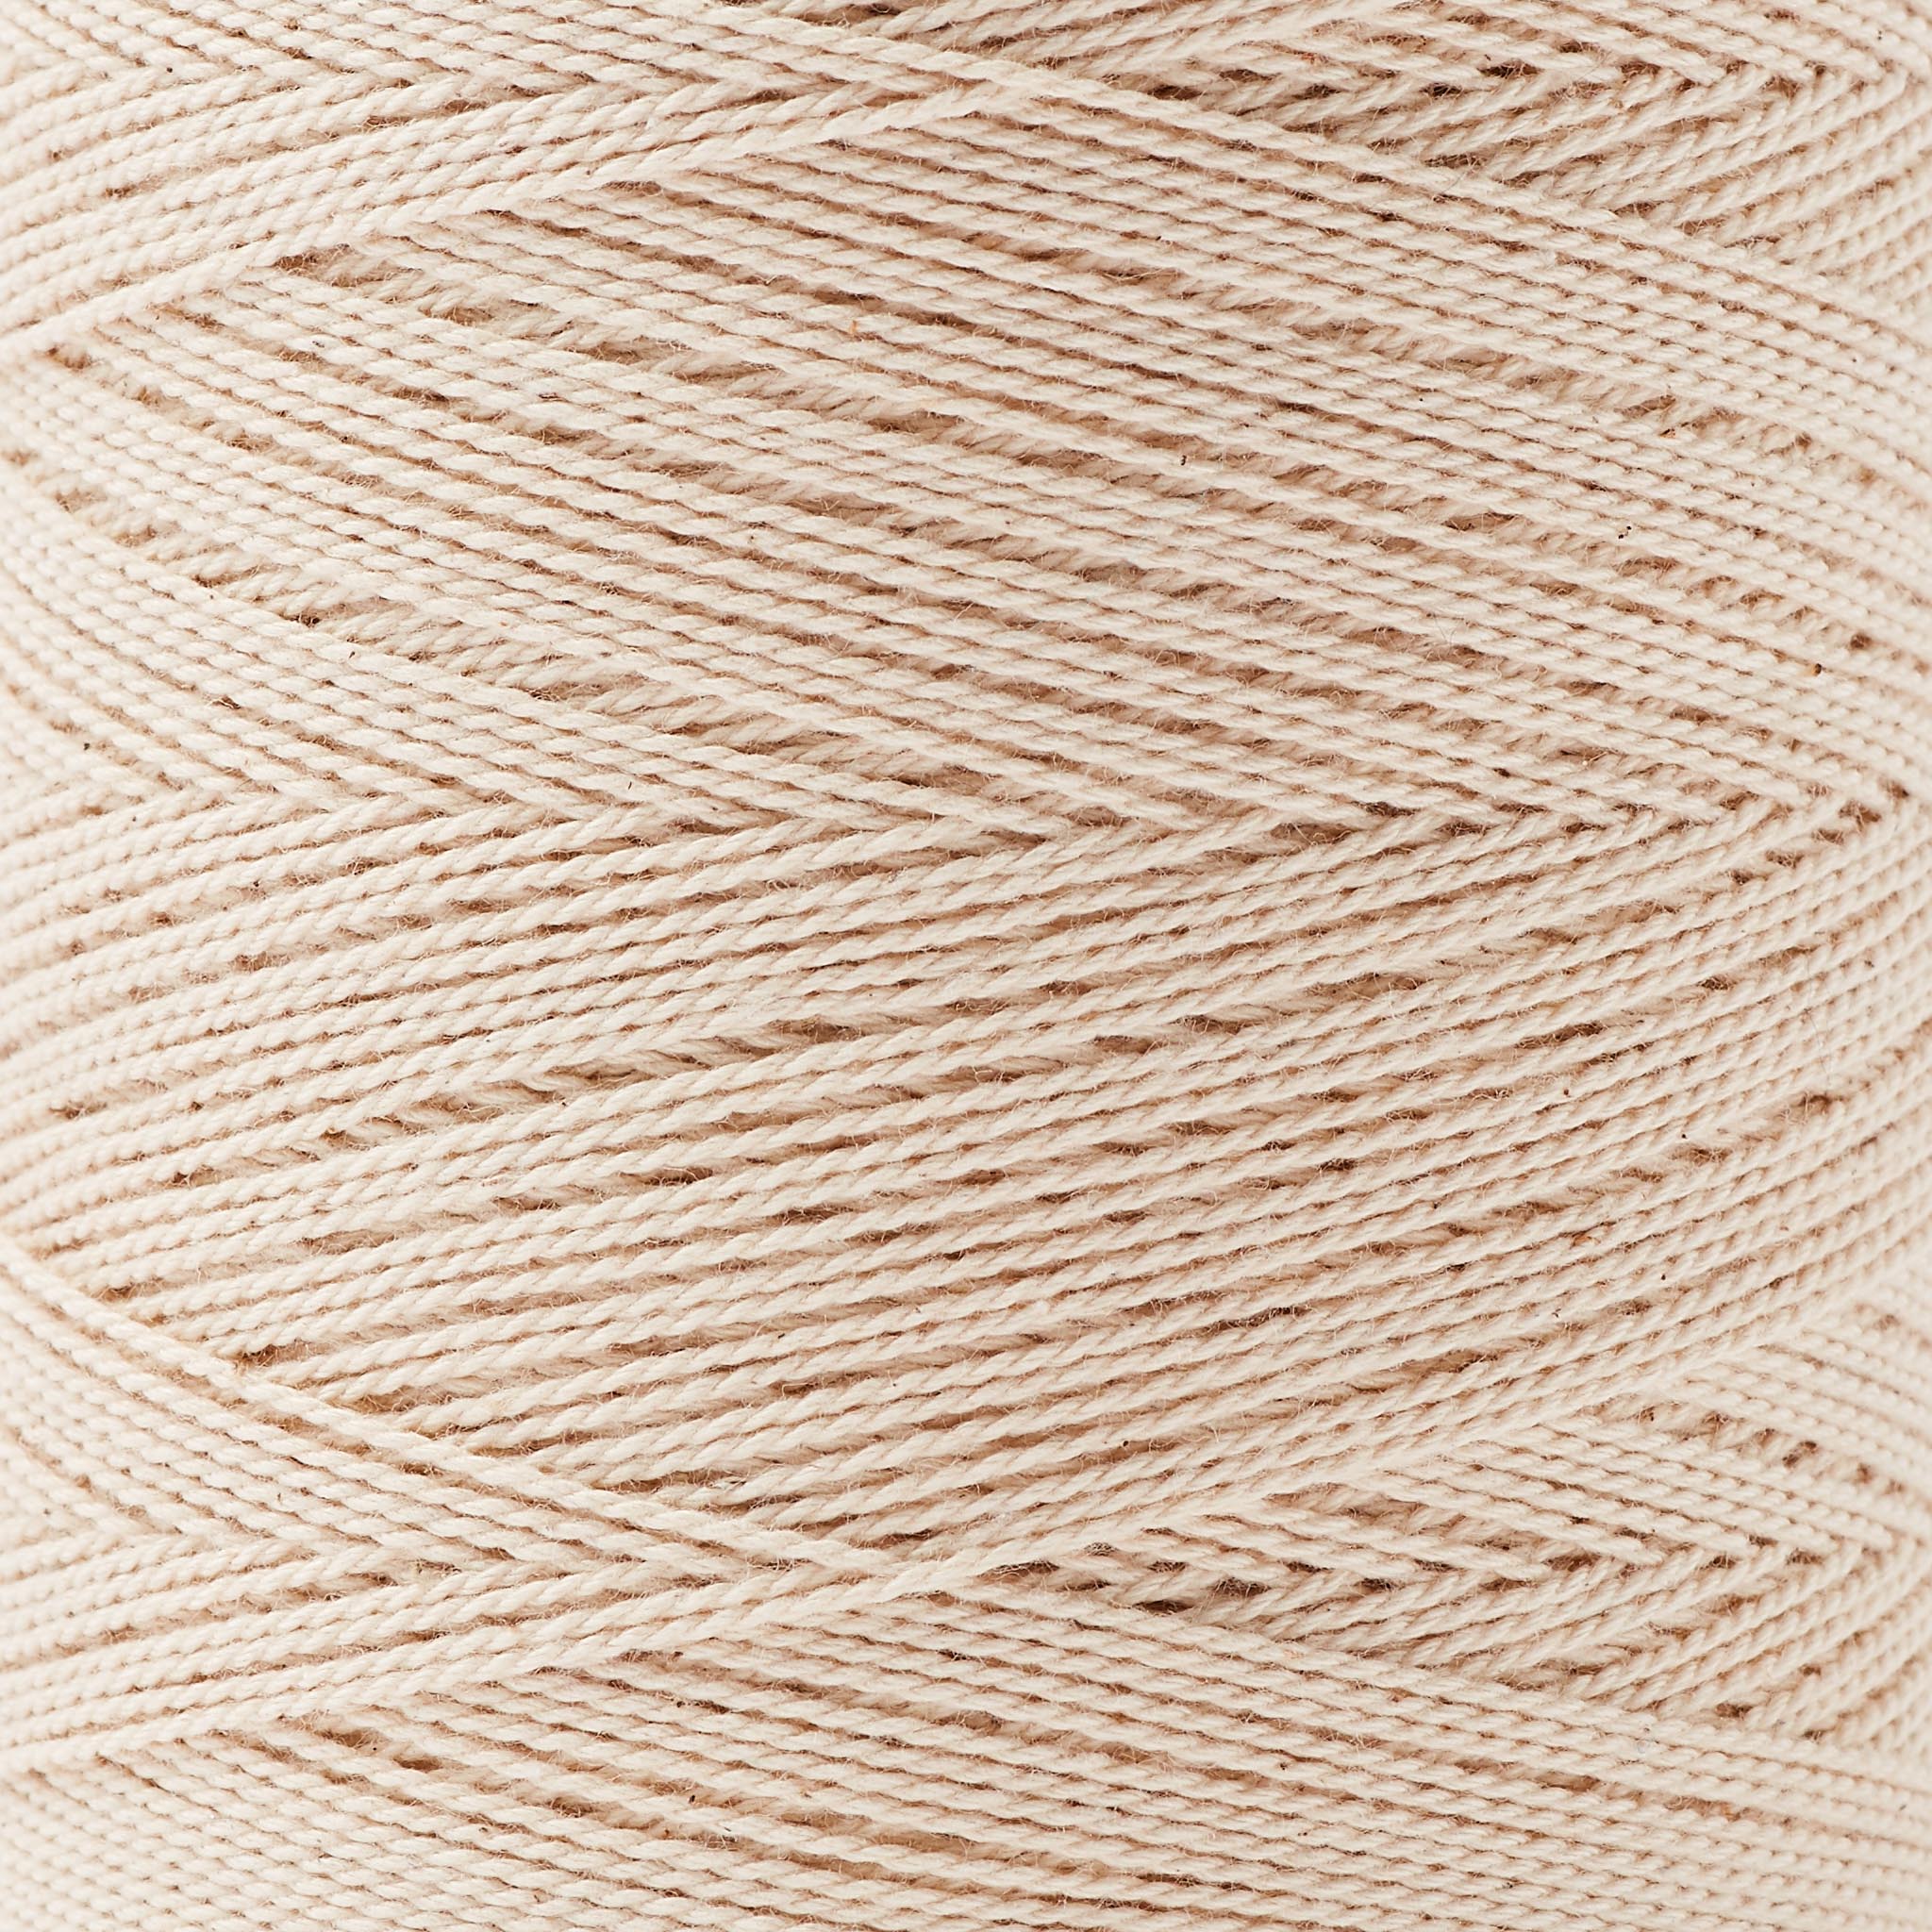 Natural Cotton Seine Twine # 12 Warp Weaving Yarn for Rugs and Tapestr -  Gist Yarn